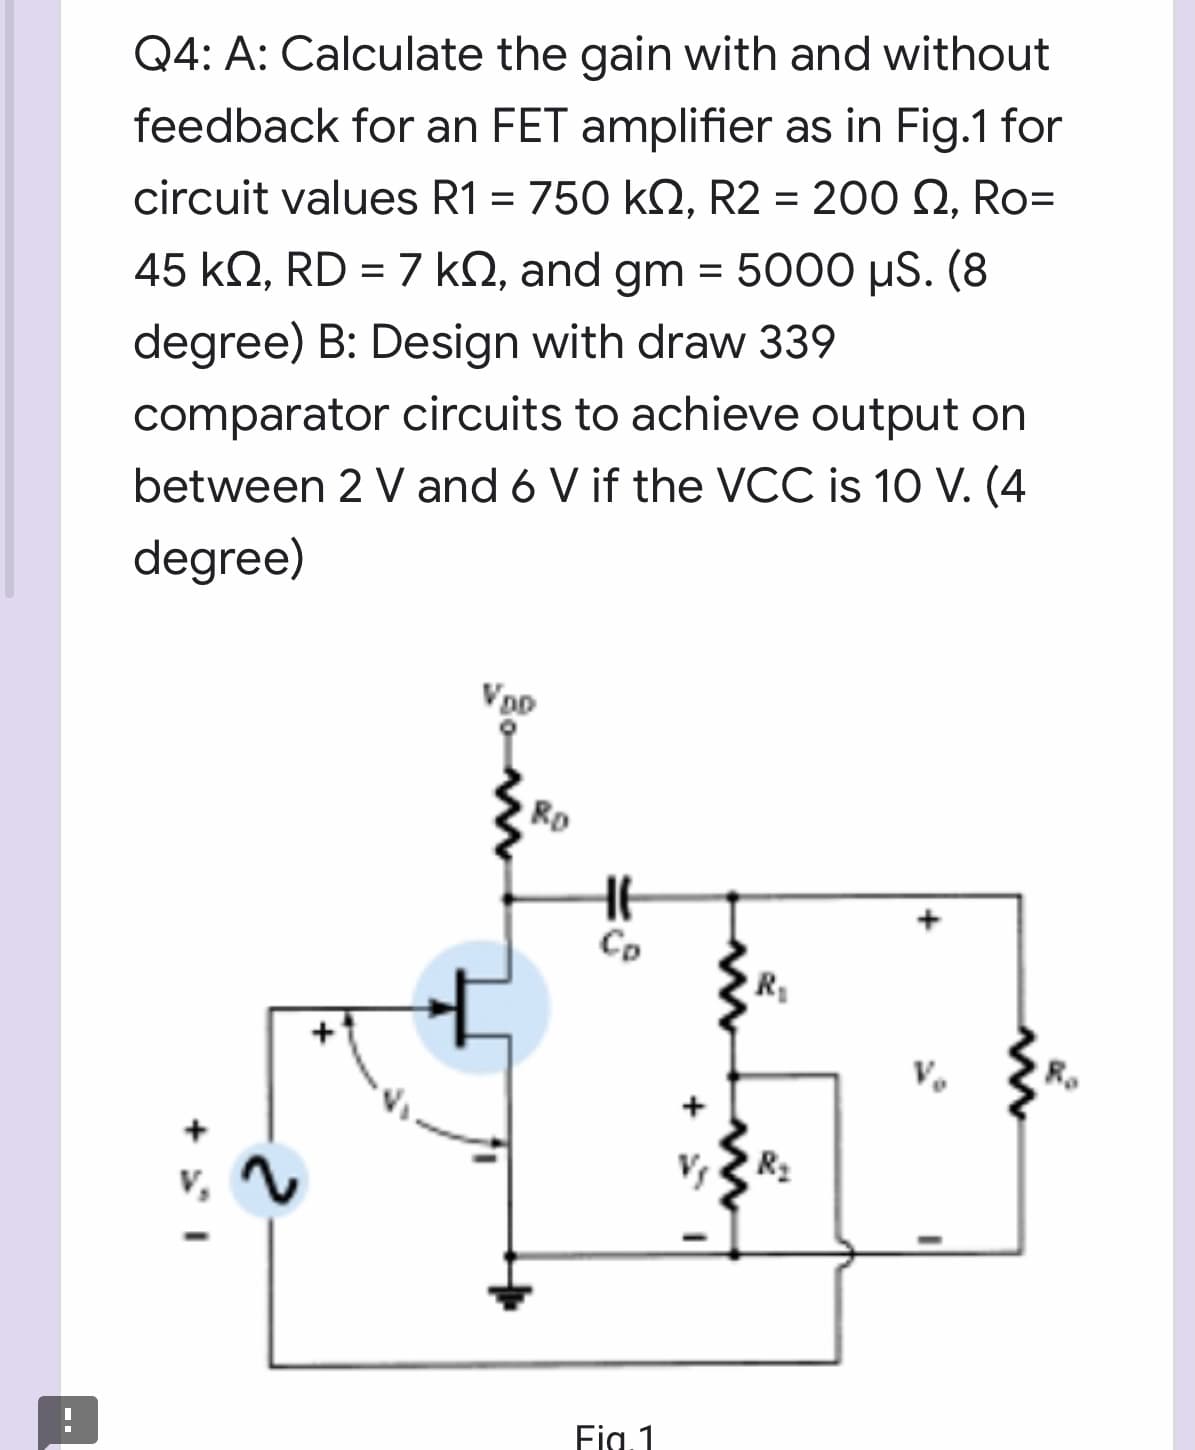 Q4: A: Calculate the gain with and without
feedback for an FET amplifier as in Fig.1 for
circuit values R1 = 750 kQ, R2 = 200 Q, Ro=
45 kN, RD = 7 kQ, and gm = 5000 µS. (8
degree) B: Design with draw 339
comparator circuits to achieve output on
between 2 V and 6 V if the VCC is 10 V. (4
degree)
Rp
Co
R
R2
Fig.1
